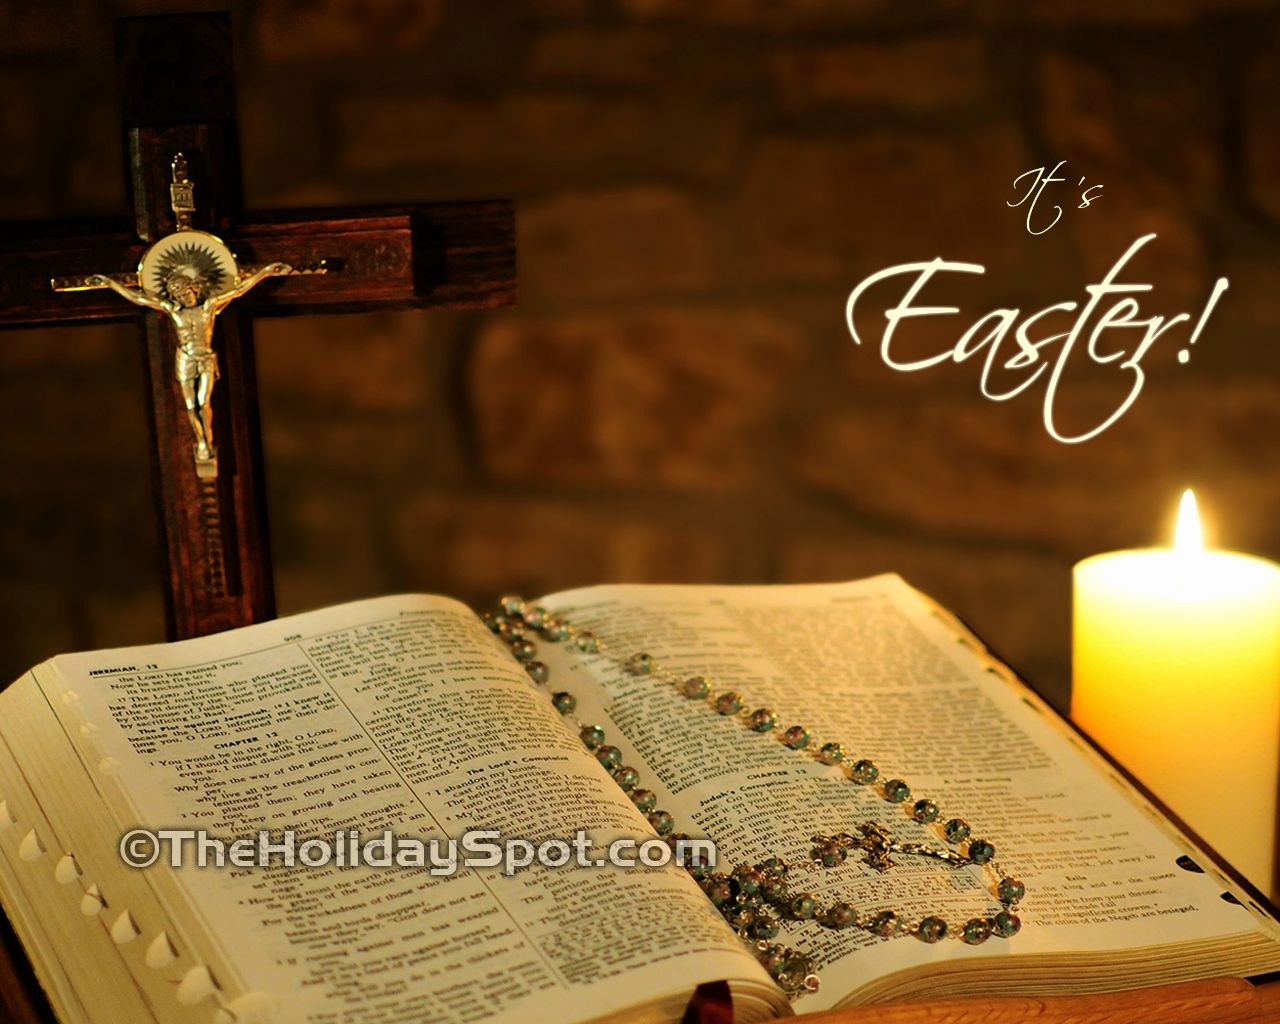 Awesome Christian Easter Wallpaper Ideas